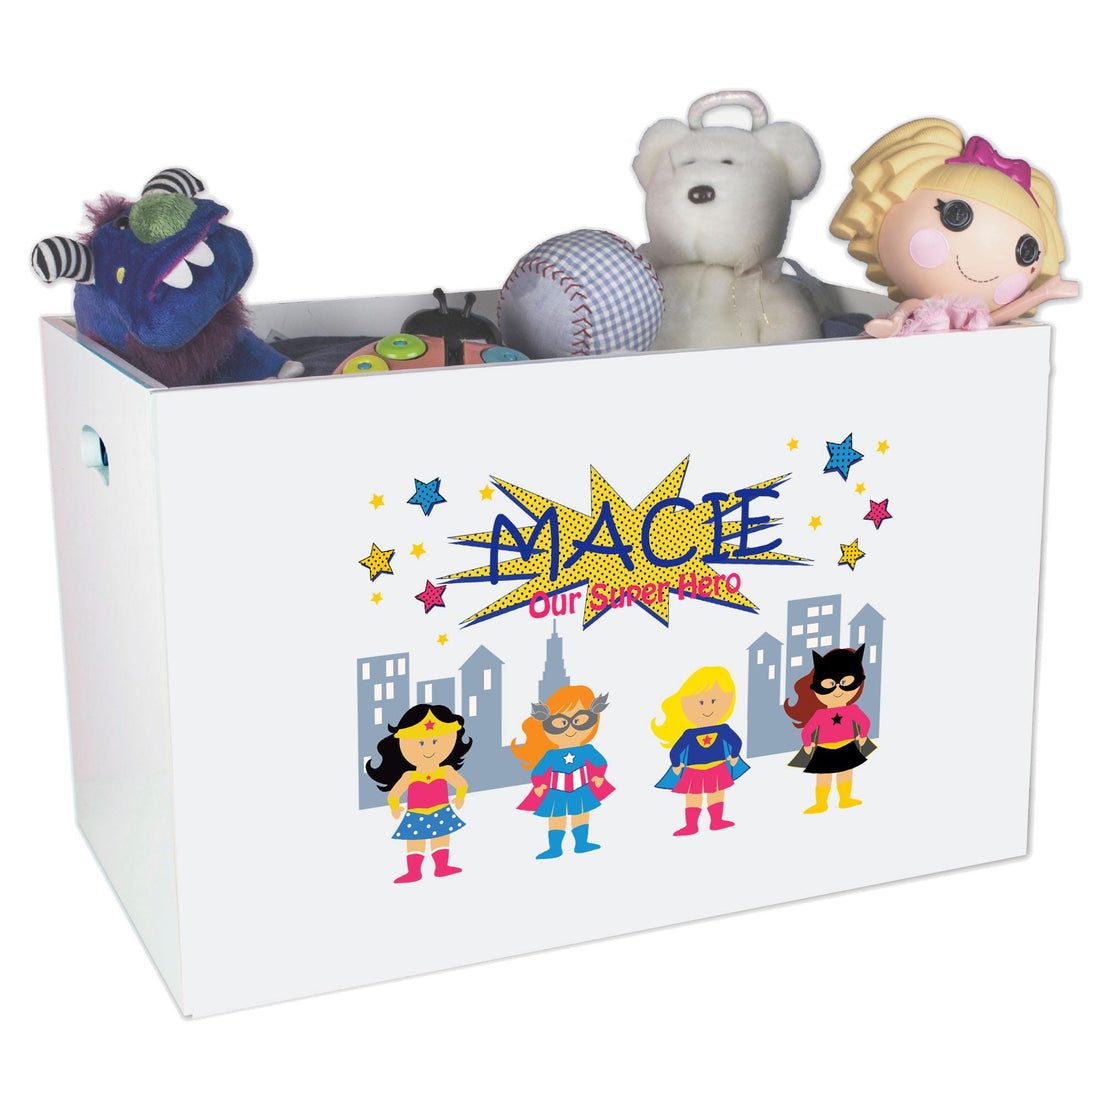 Open White Toy Box Bench with Super Girls design